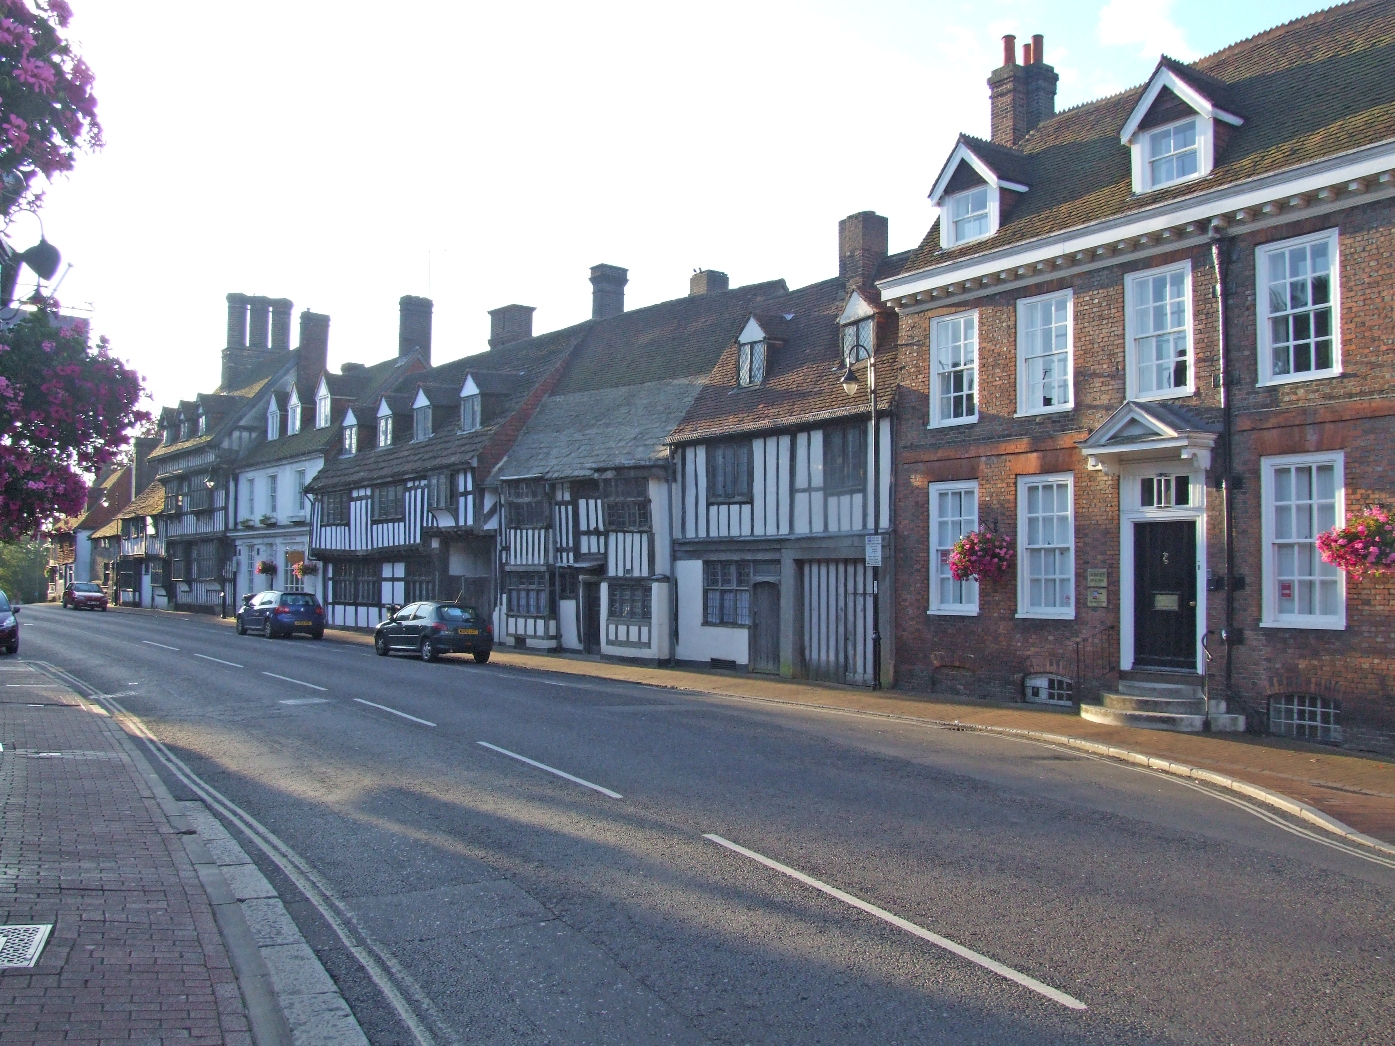 The historic High Street with half-timbered buildings © East Grinstead Town Promotions